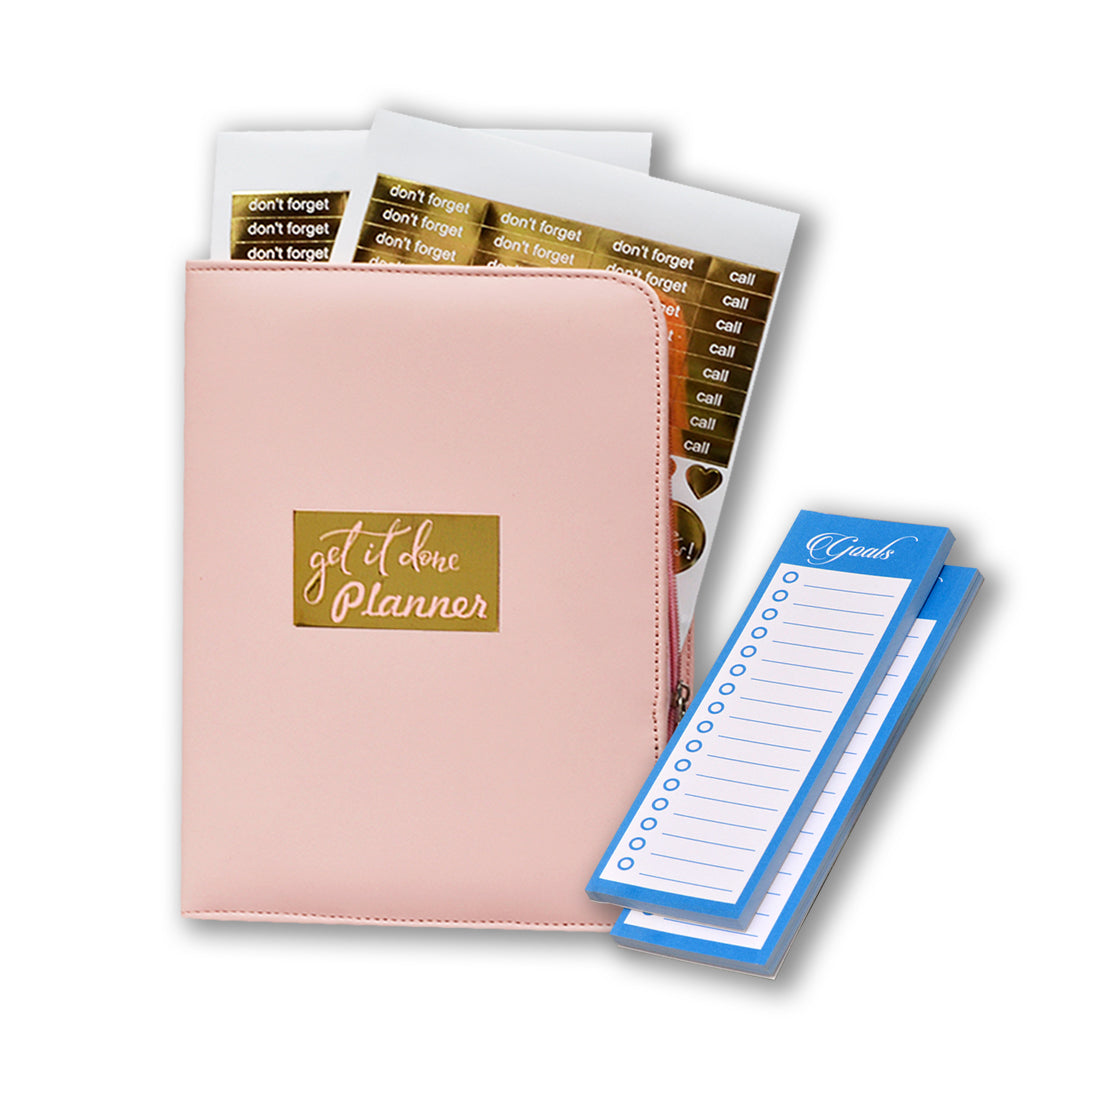 Exclusive Pink Corporate business Undated diary / Organizer Planner Set with to-do-list.